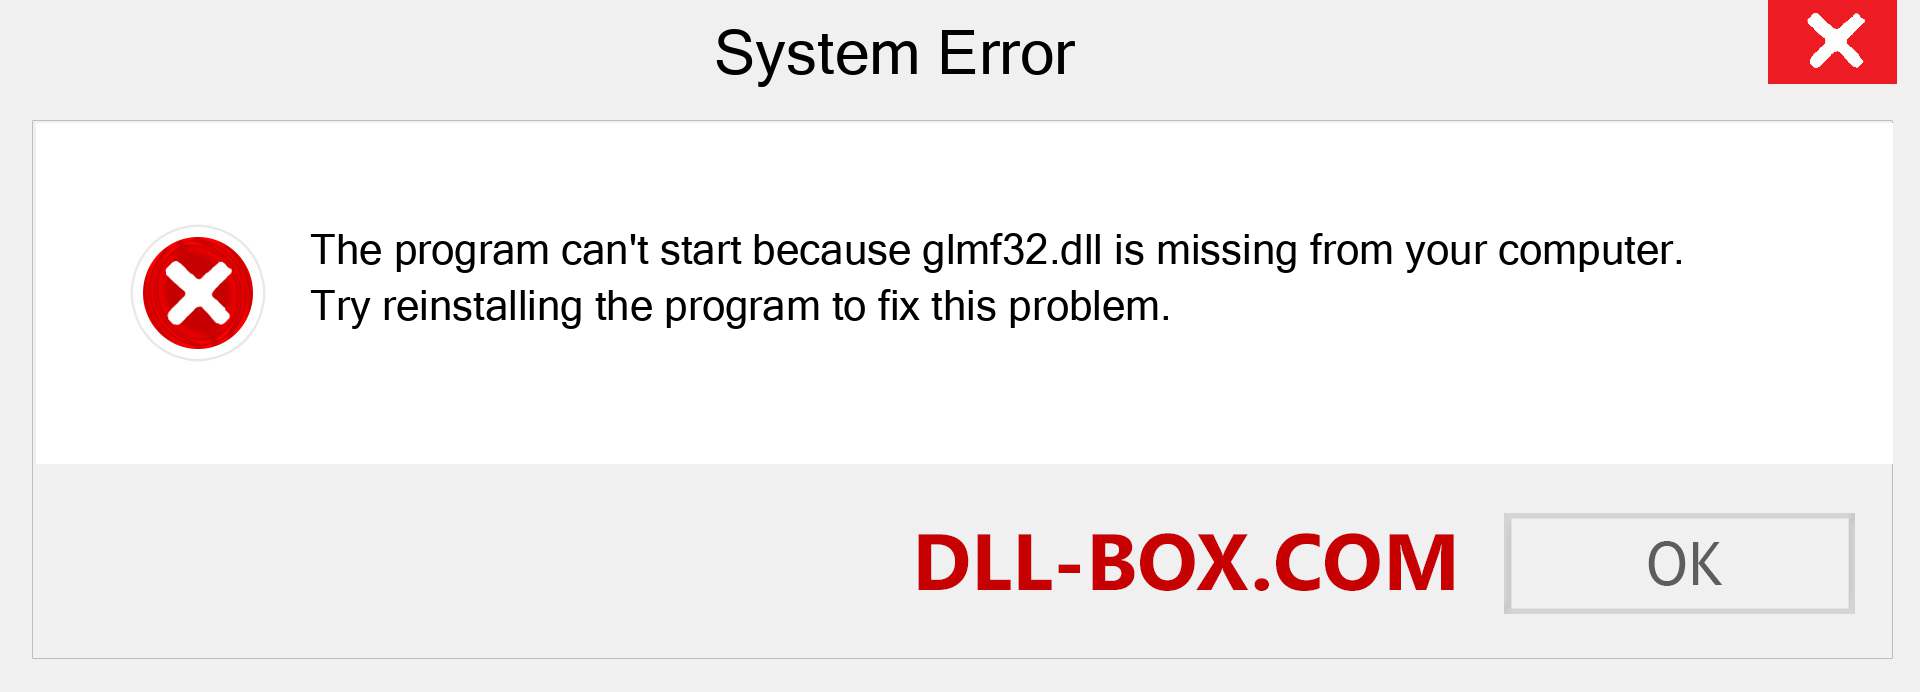  glmf32.dll file is missing?. Download for Windows 7, 8, 10 - Fix  glmf32 dll Missing Error on Windows, photos, images